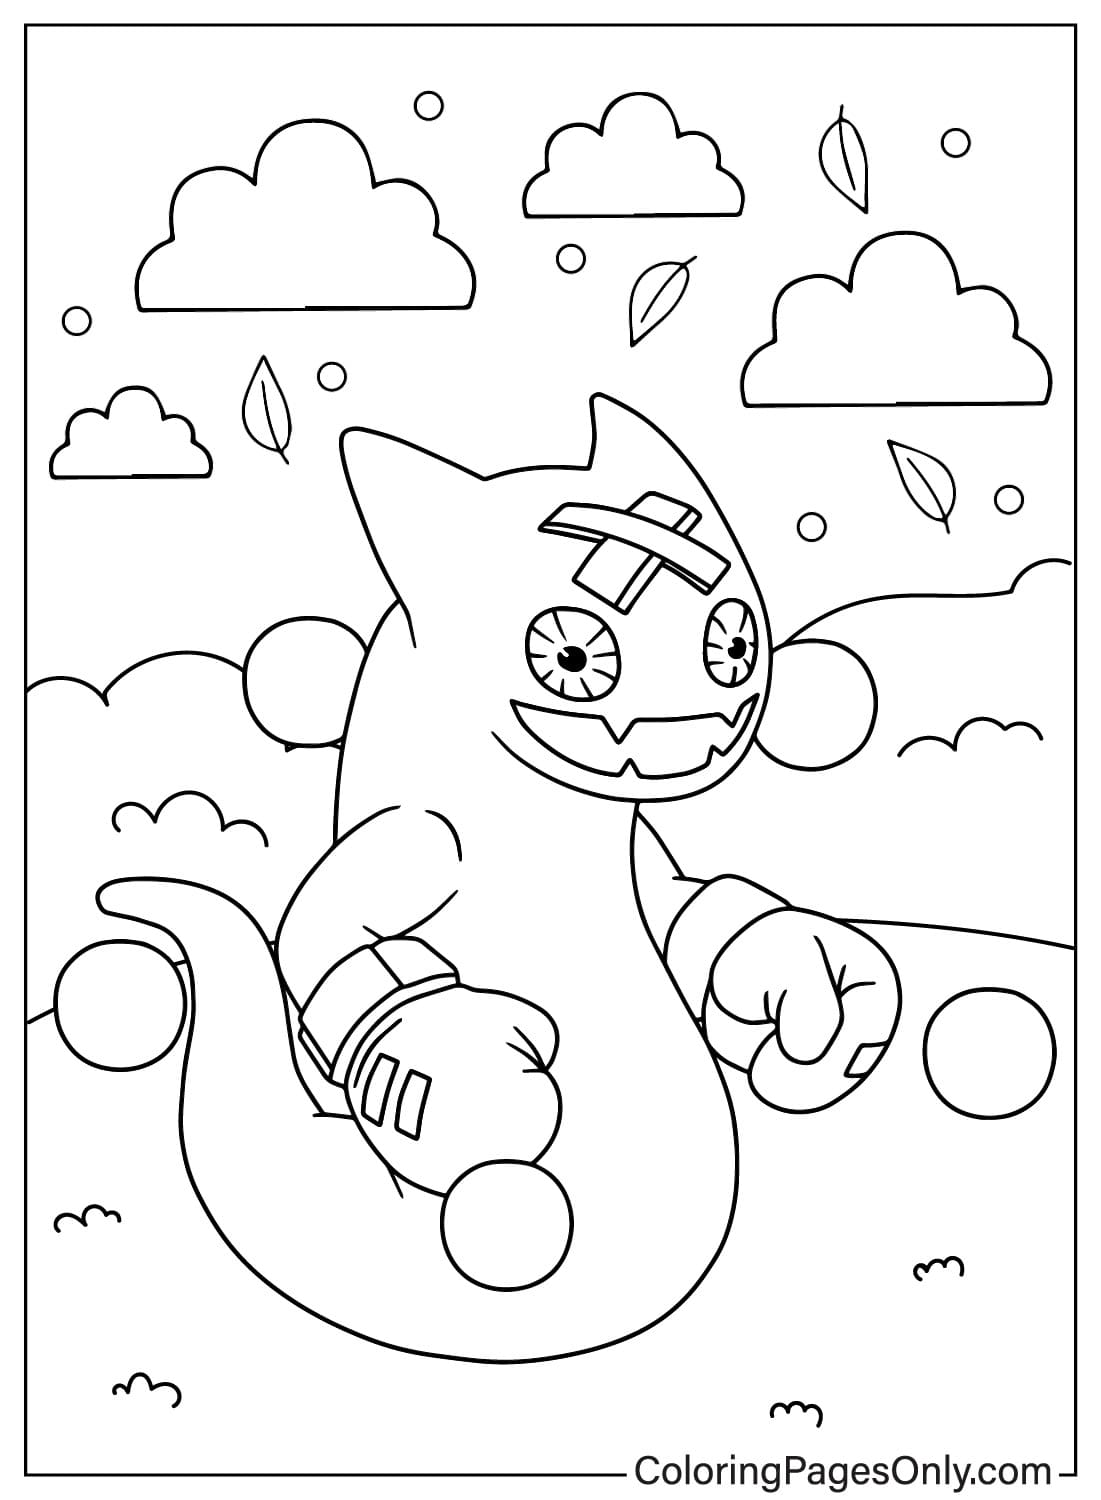 Ghazt Drawing Coloring Page from Ghazt